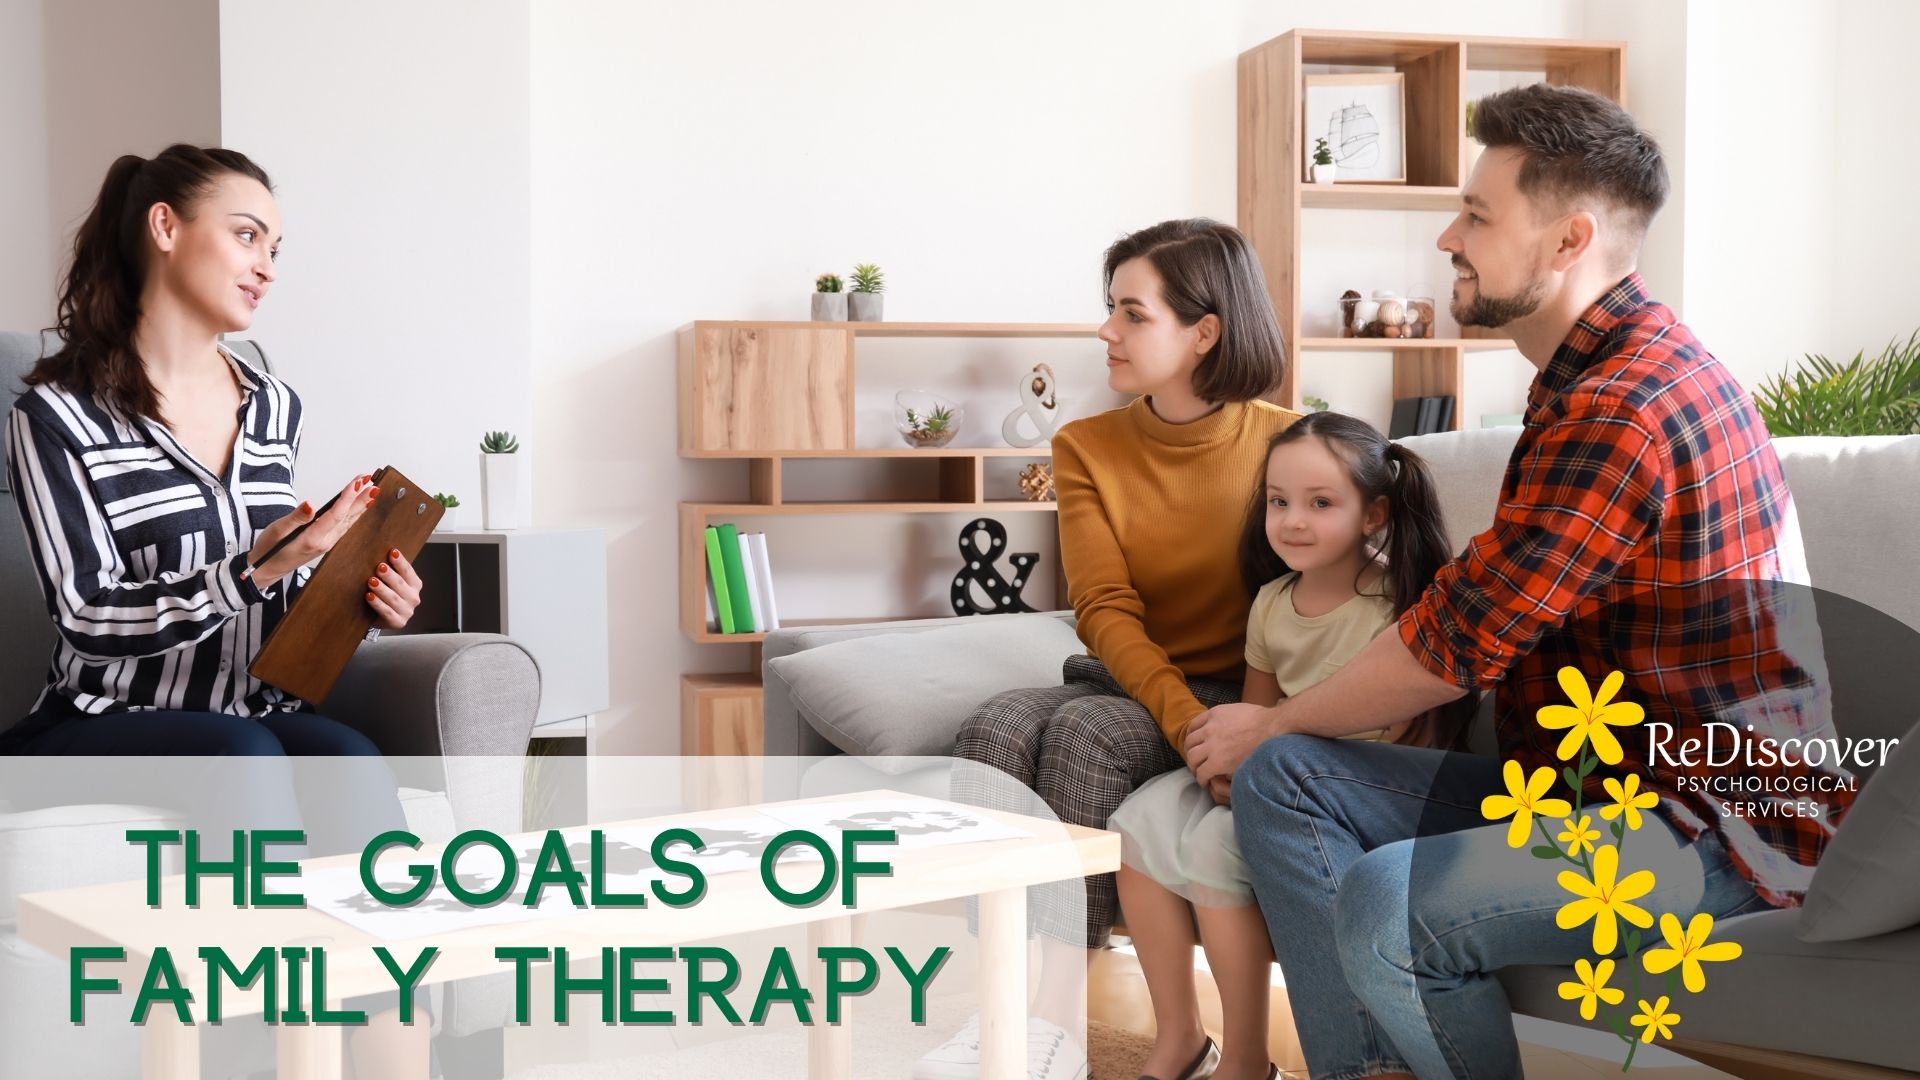 What are The Goals of Family Therapy